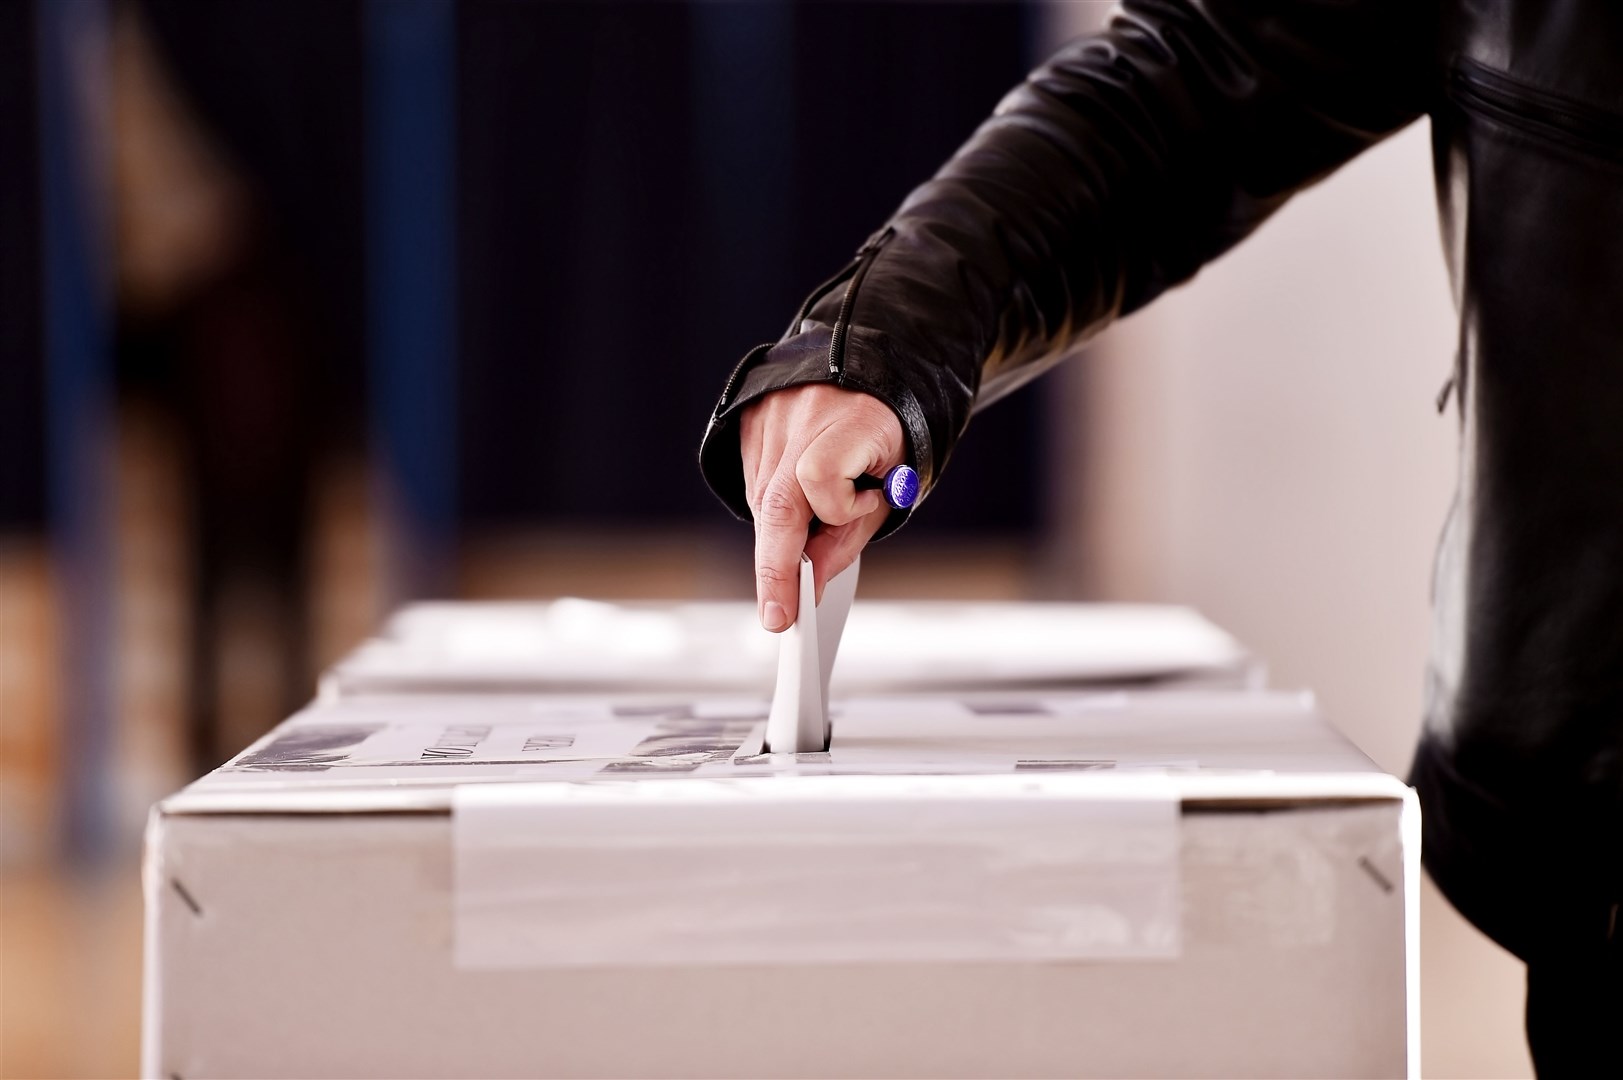 Votes for the 2019 European Parliamentary elections can be cast until 10pm.